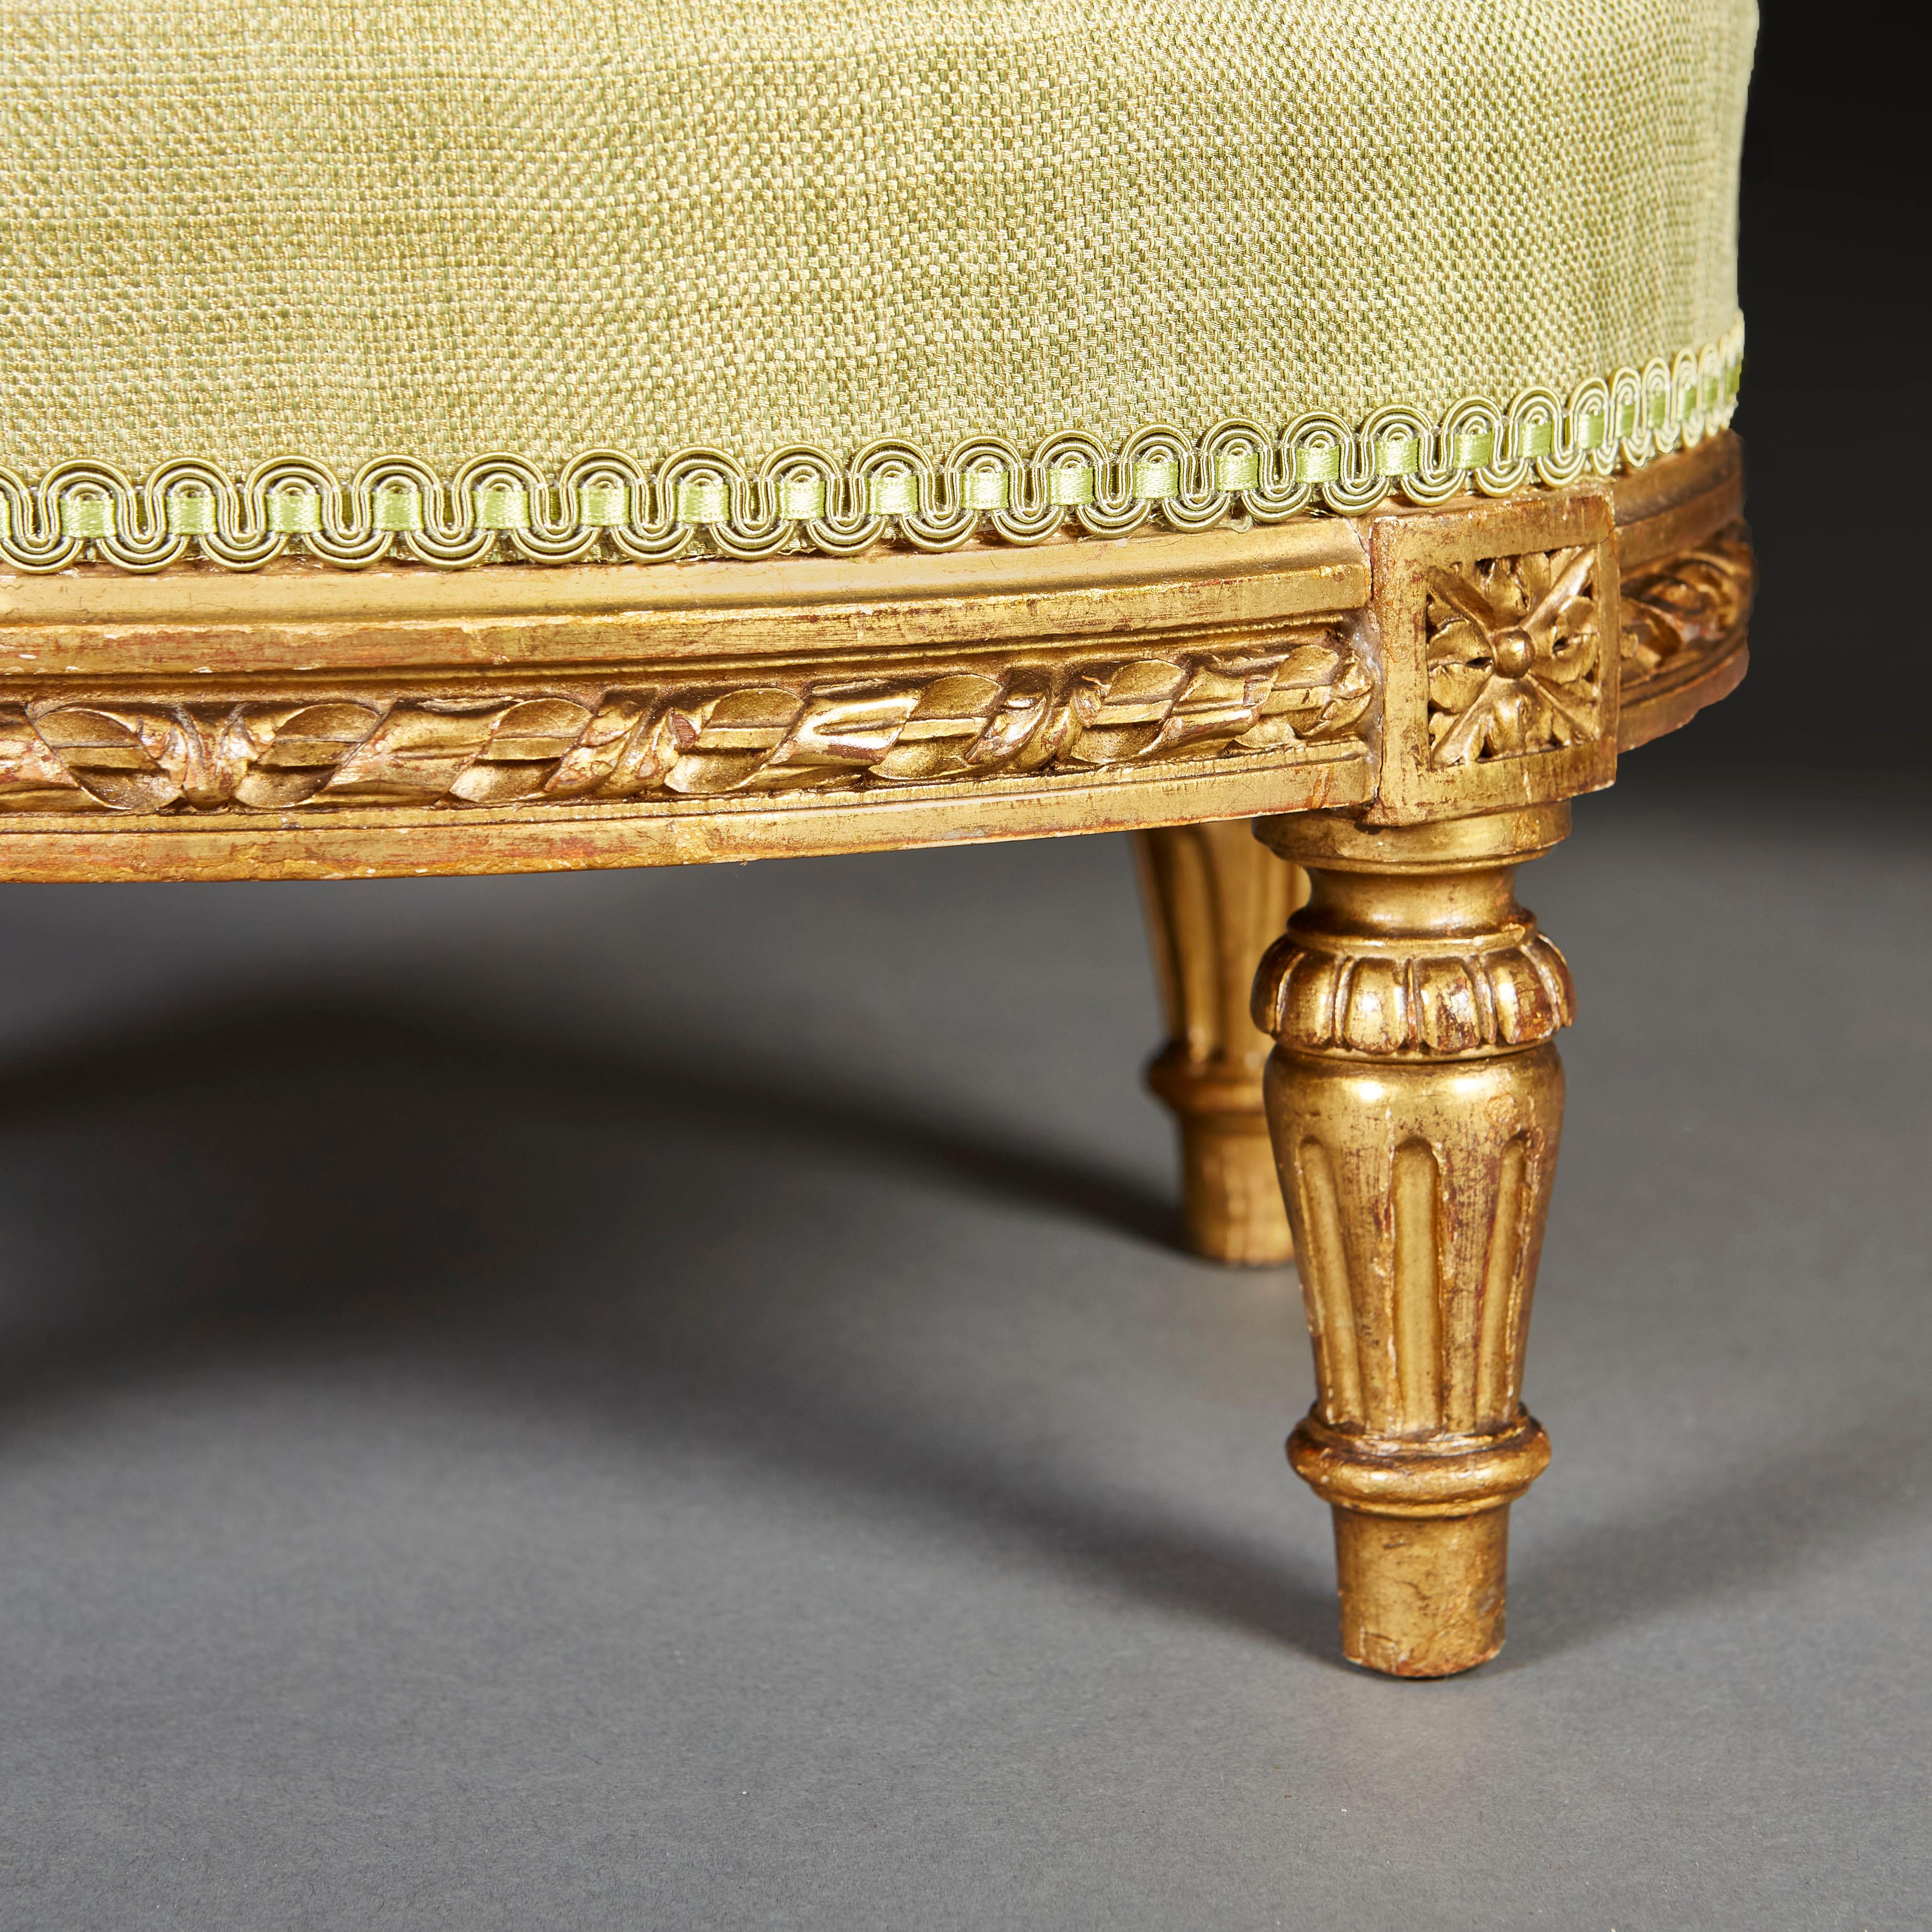 Matched Pair of 18th Century French Giltwood Footstools For Sale 1